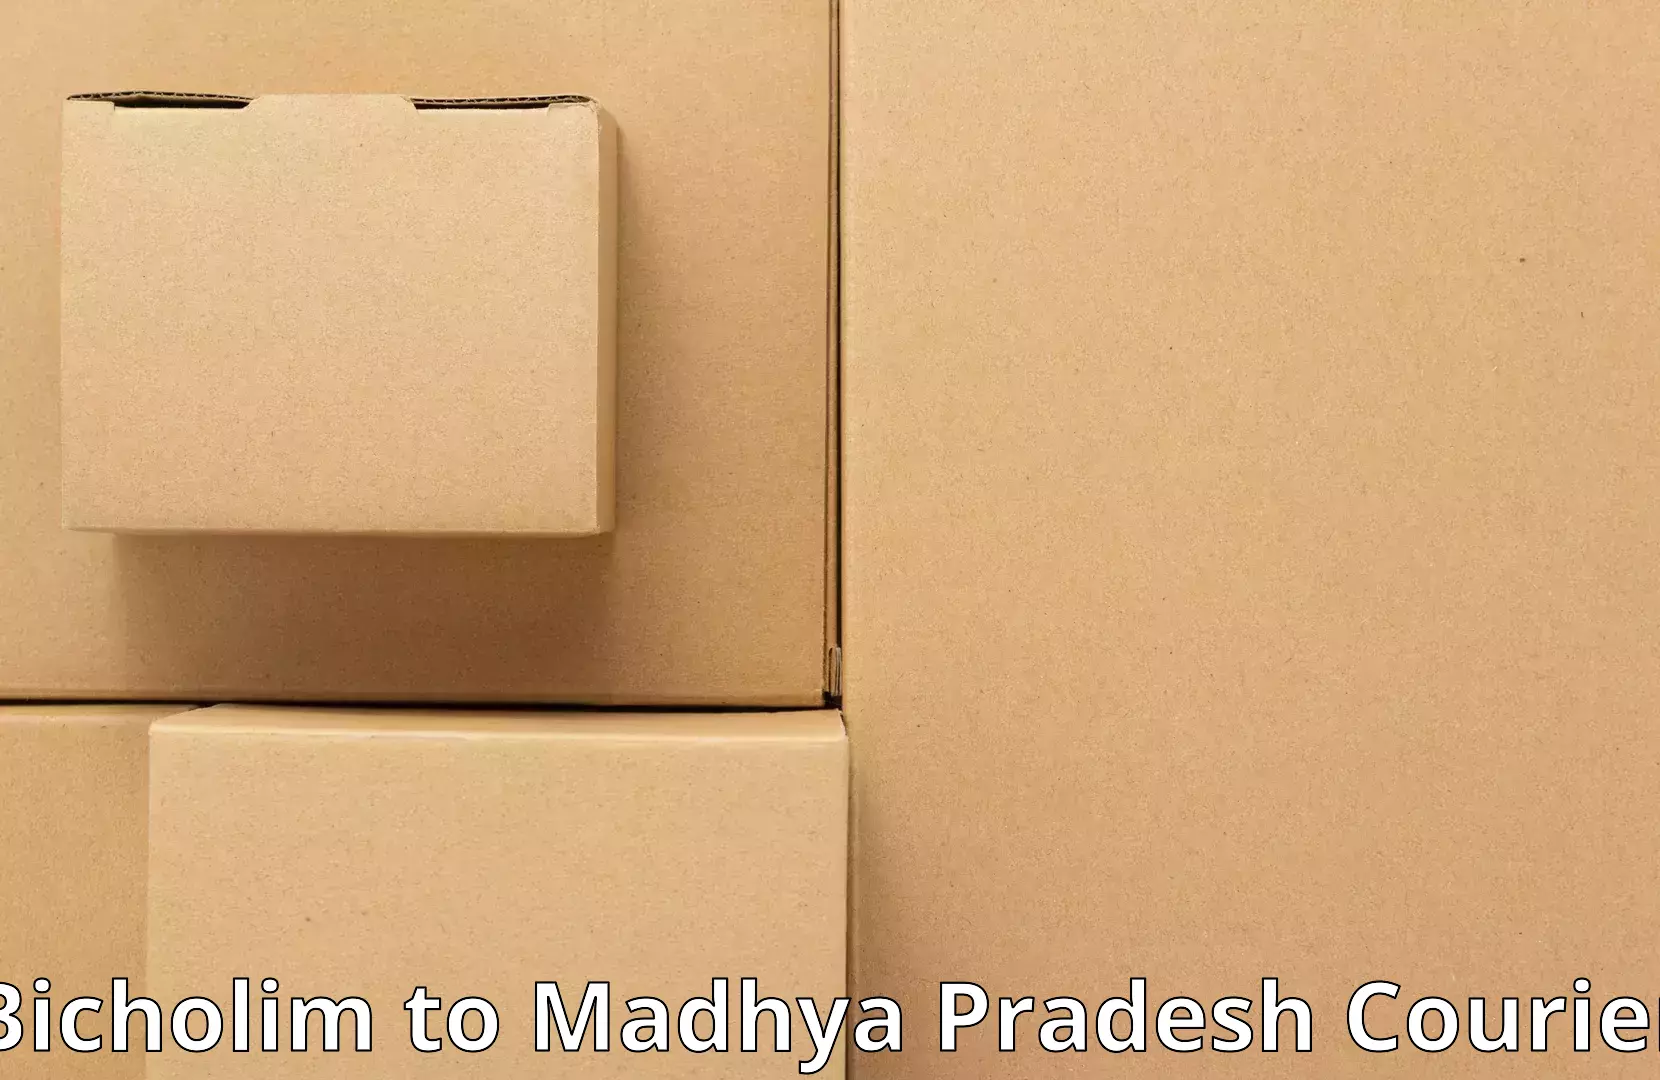 Dependable moving services in Bicholim to Singrauli